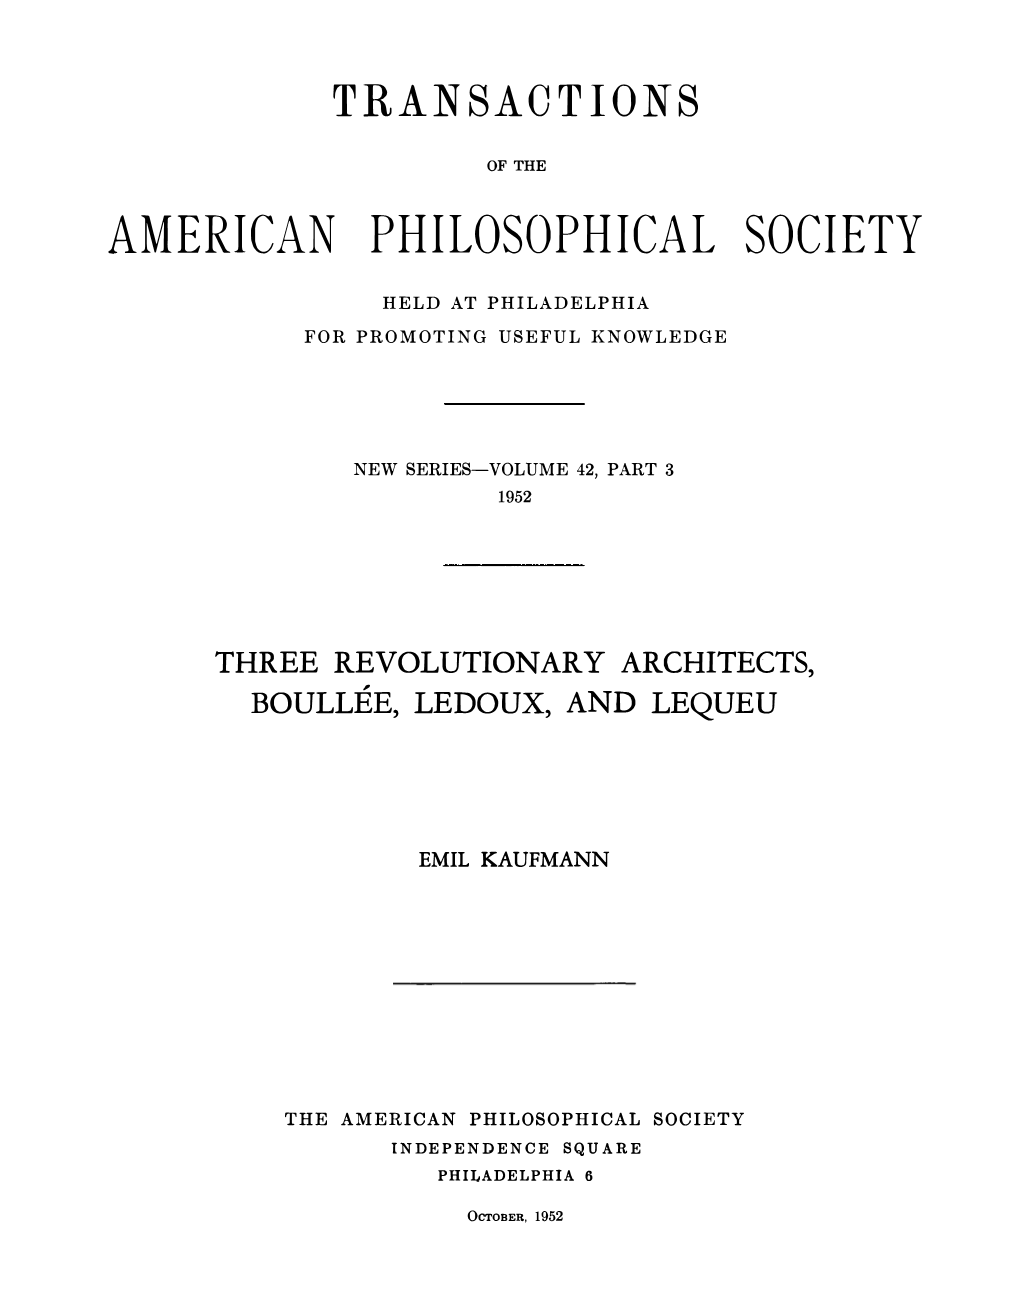 Three Revolutionary Architects: Boullee, Ledoux, and Lequeu